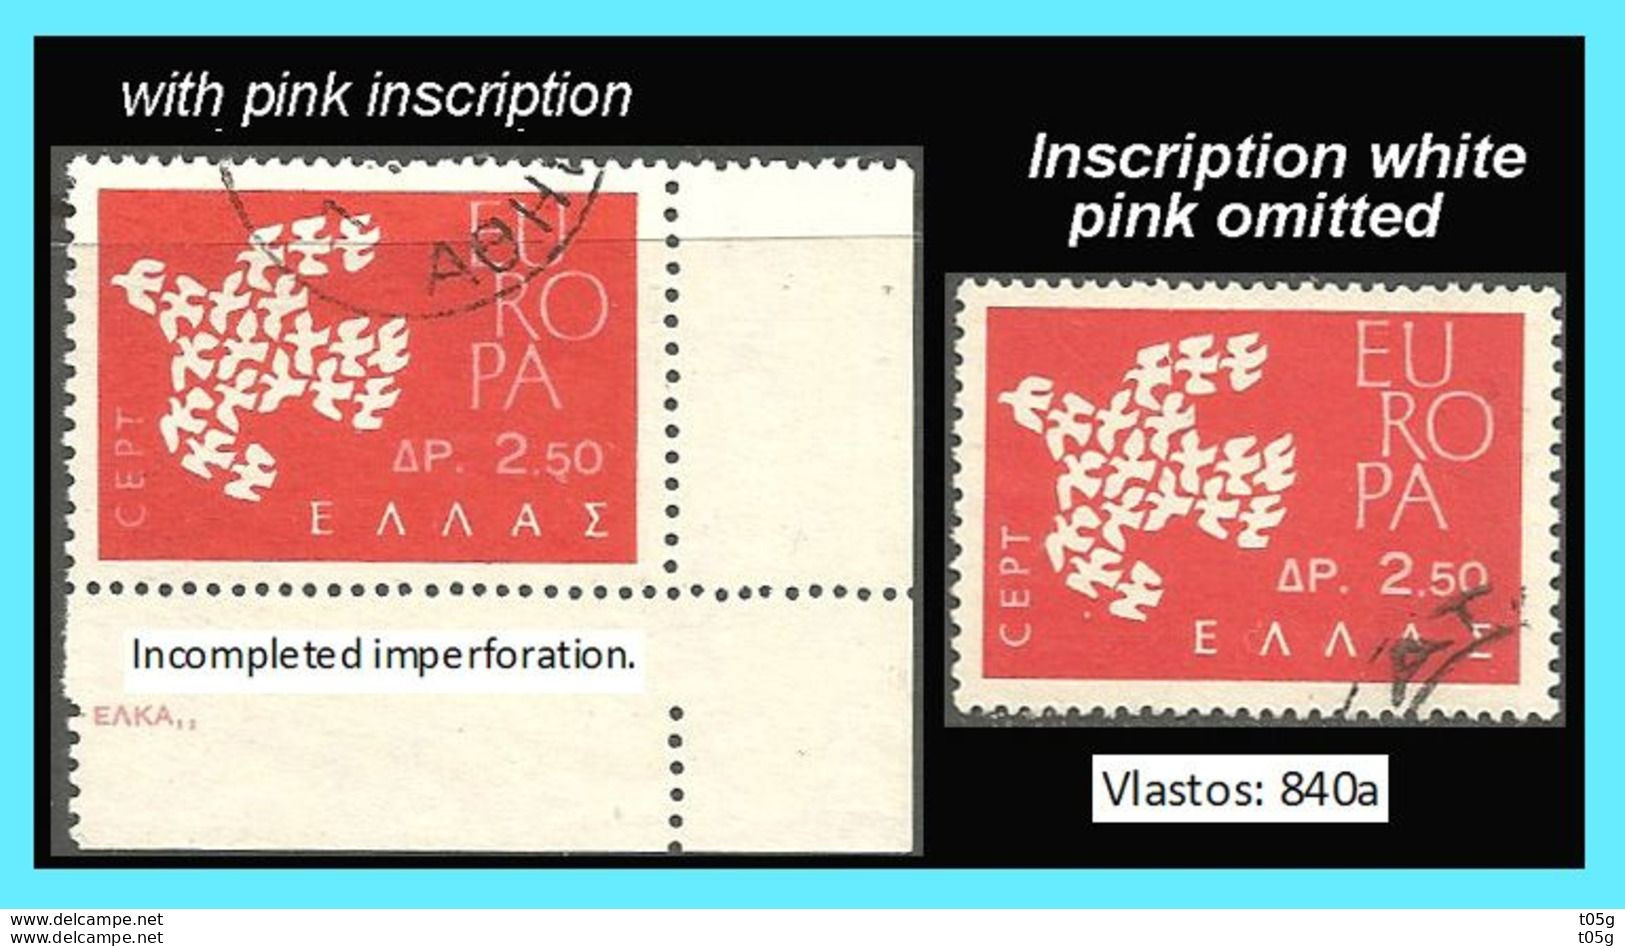 GREECE-GRECe - HELLAS -EUROPA CEPT 1961: 2.50drx Inscription White, Pink Omitted Used - Used Stamps